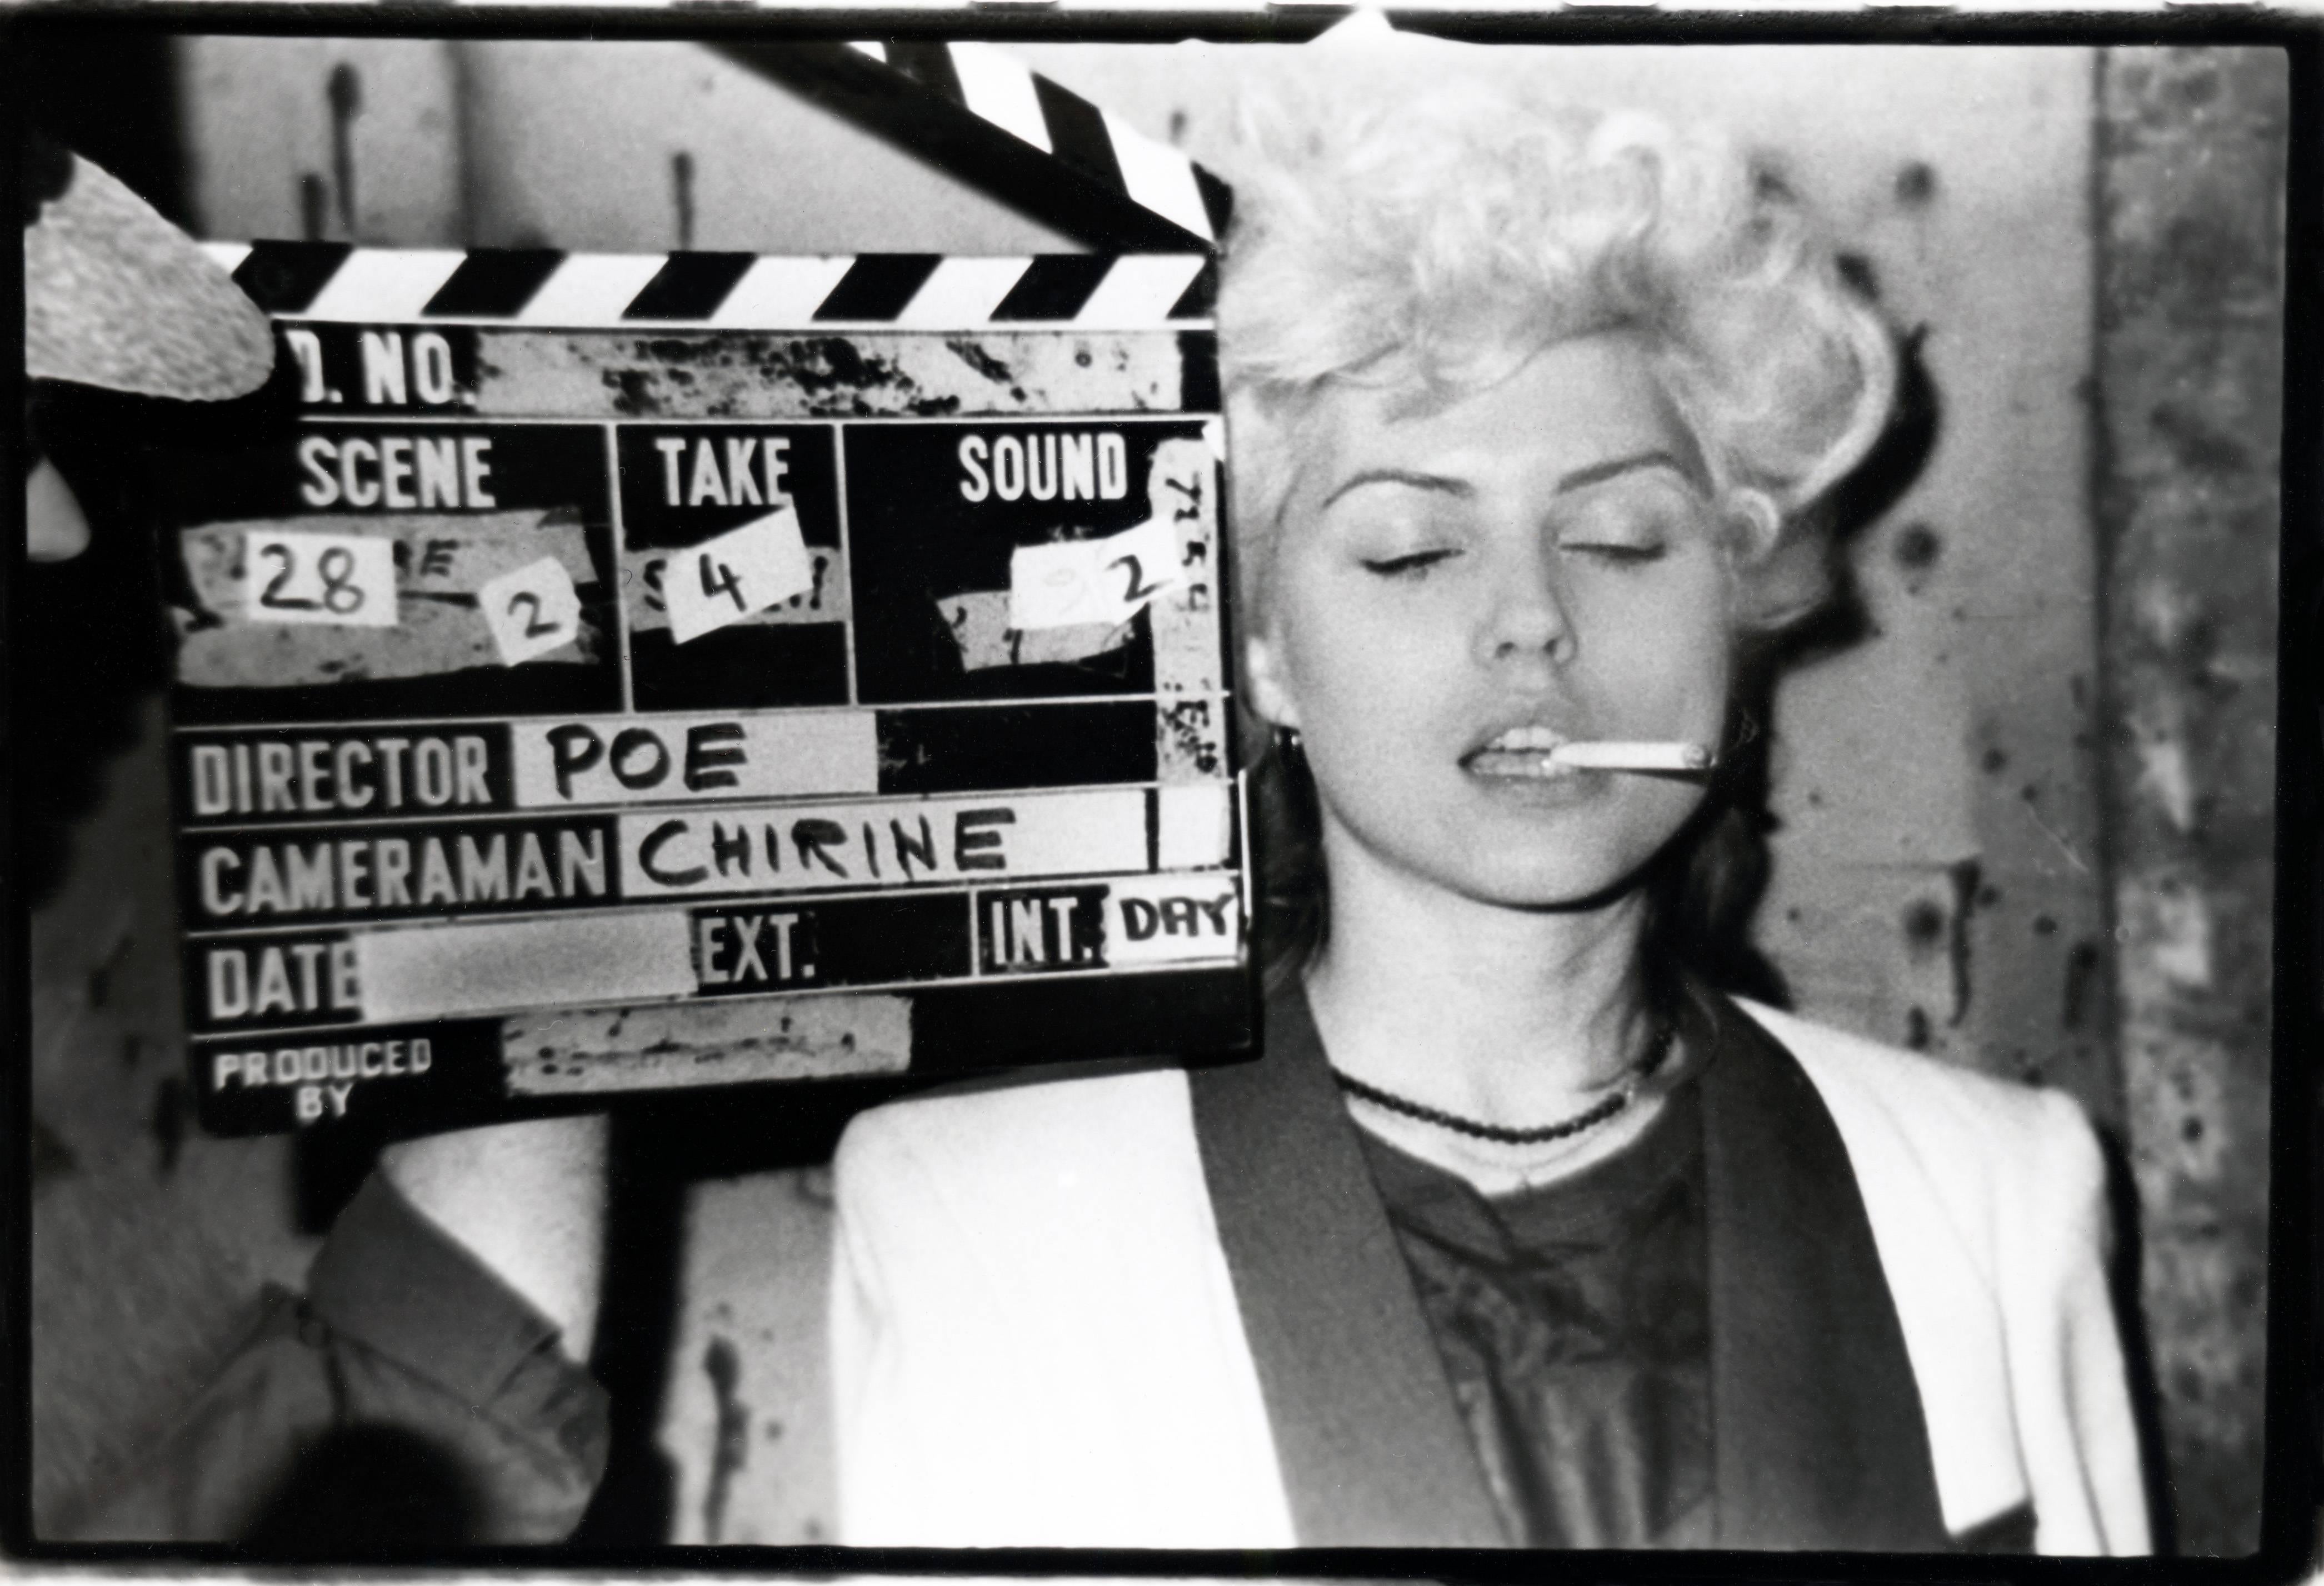 Fernando Natalici Black and White Photograph - Debbie Harry on the set of The Foreigner (East Village 1977)